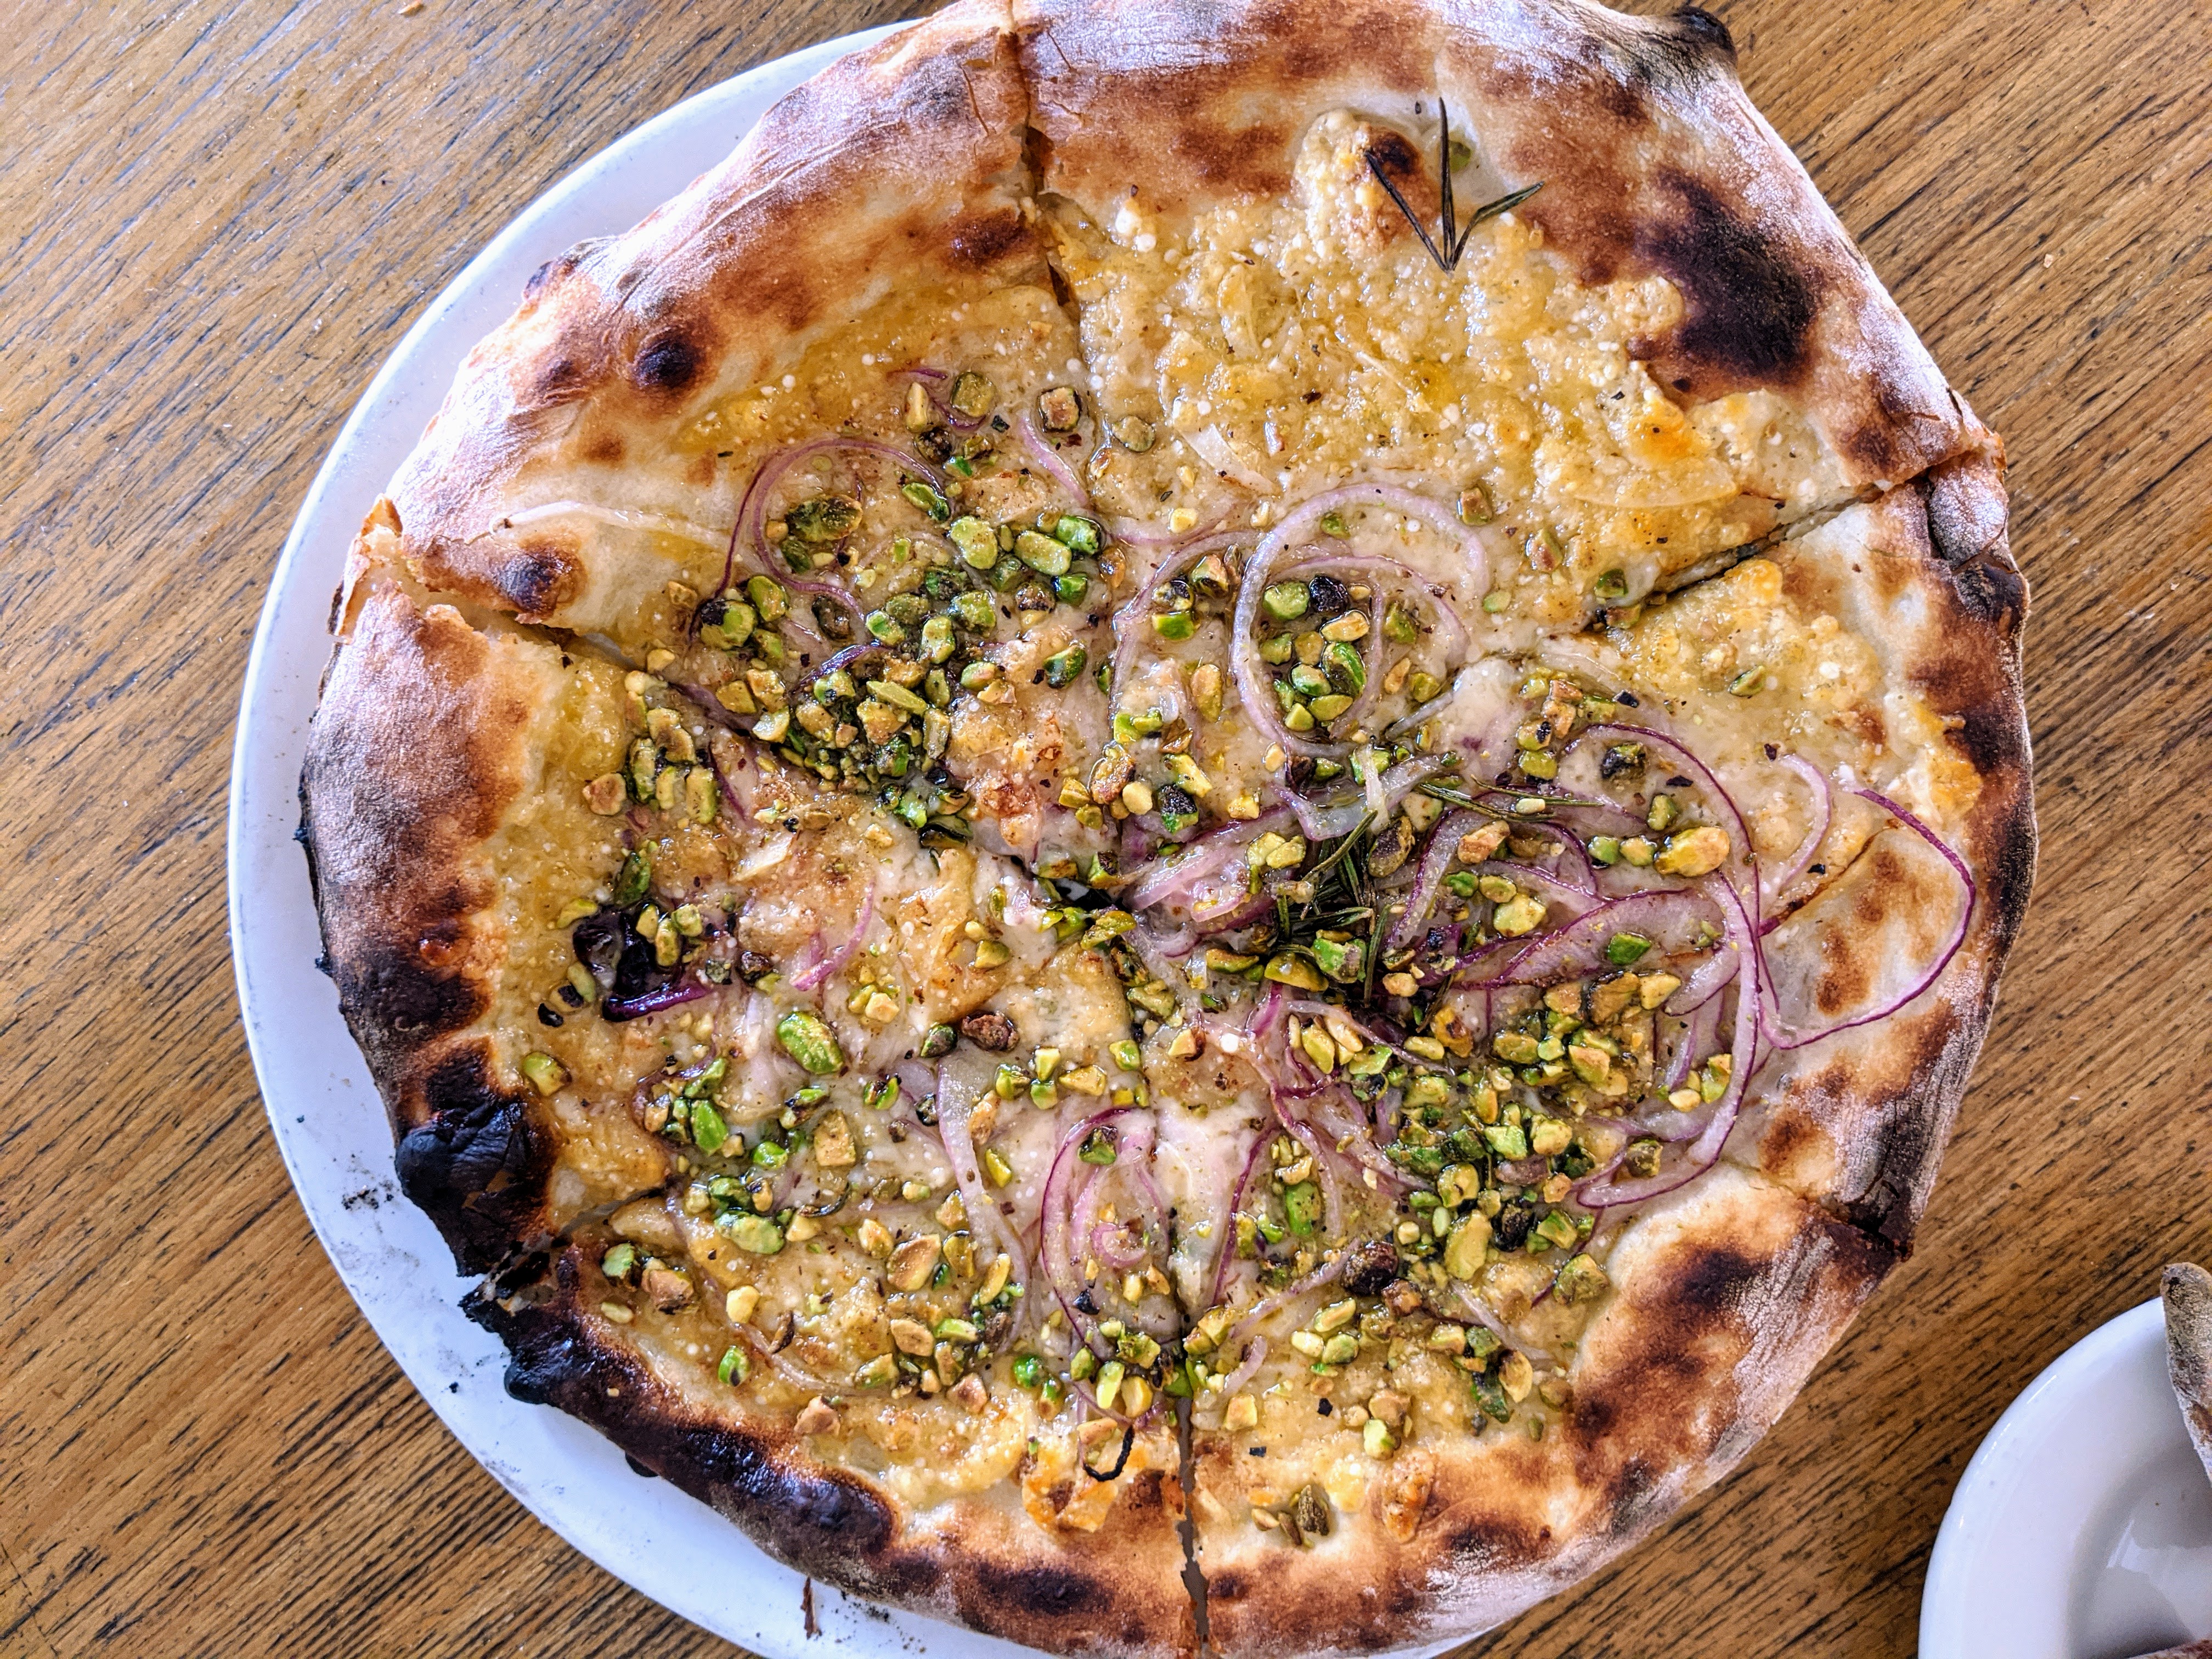 Rosa pizza from Pizzeria Bianco in Phoenix with pistachios, red onions, parmesan, and rosemary.